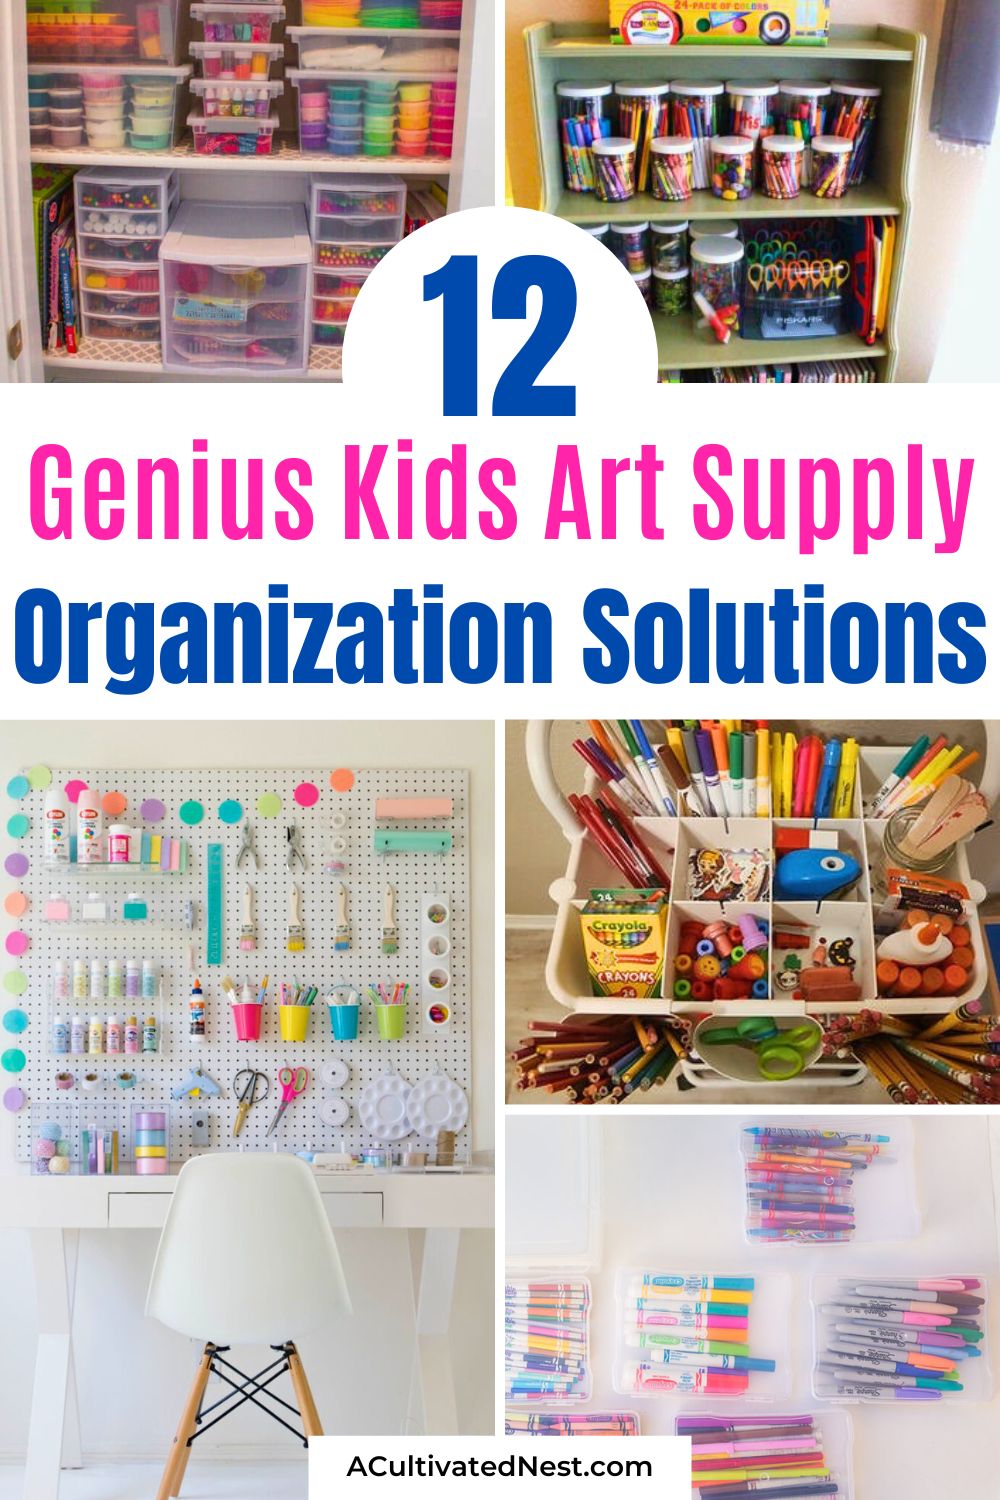 12 Creative Kids Art Supply Organization Solutions- Keep creativity flowing with organized chaos! Explore brilliant ways to tidy up your kids' art supplies. Whether you're working with a small space or a dedicated art room, these clever kids art supply organization solutions are both practical and playful. Say hello to stress-free creativity! | #craftOrganization #artSupplyOrganization #organizing #organizationTips #ACultivatedNest